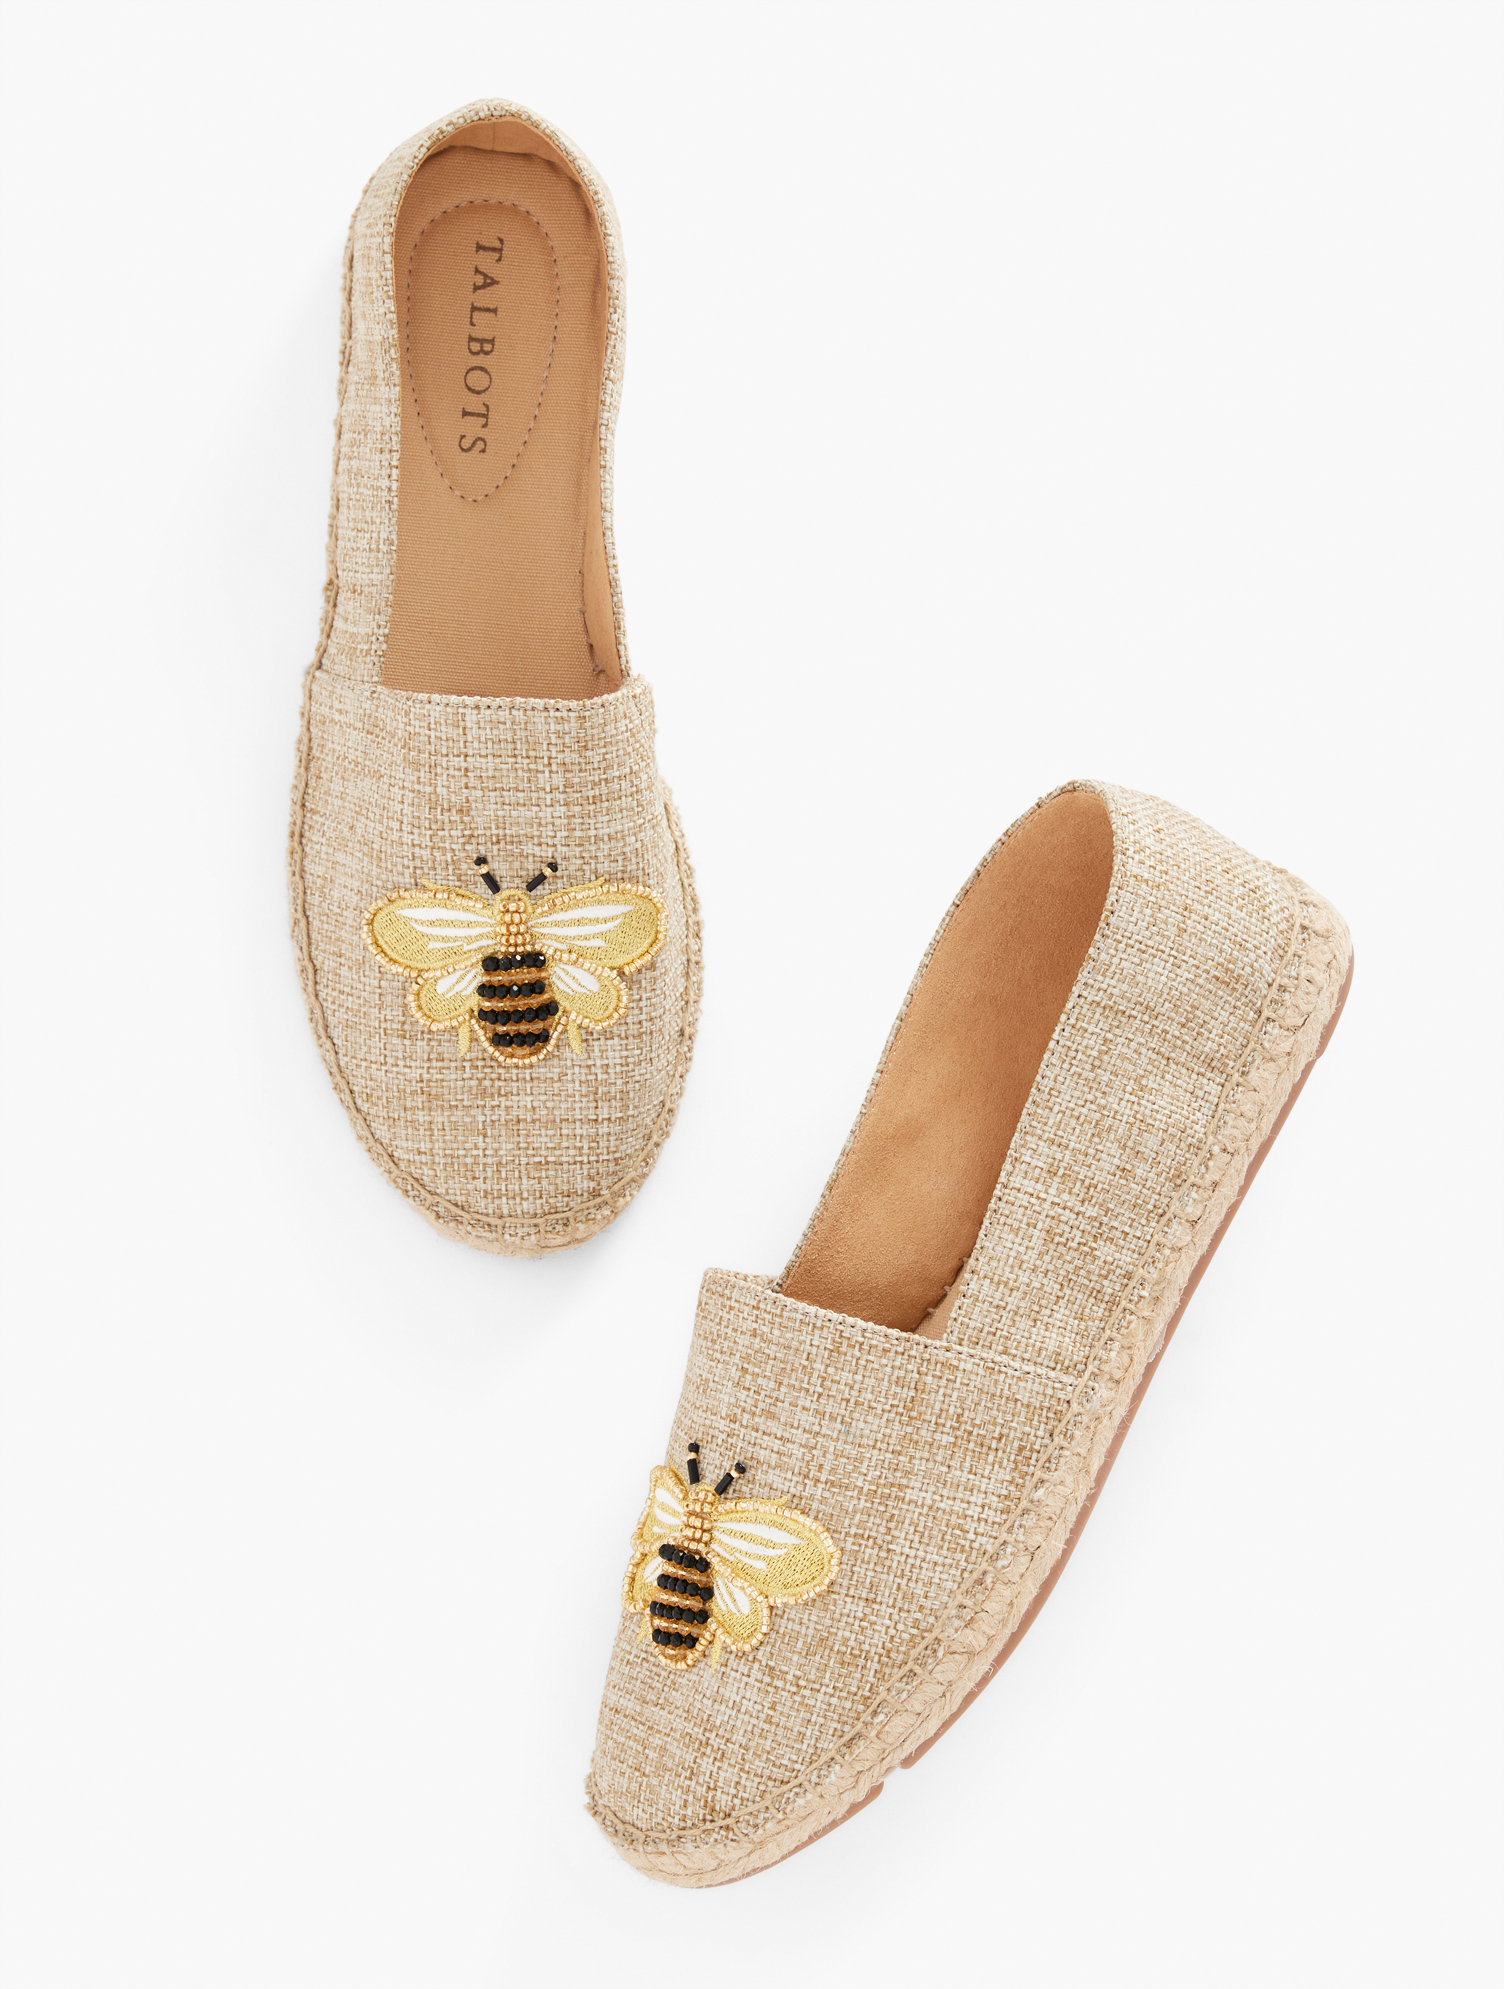 Talbots Izzy Espadrille Flats - Beaded Bee - Natural - 7 1/2 M - 100% Cotton